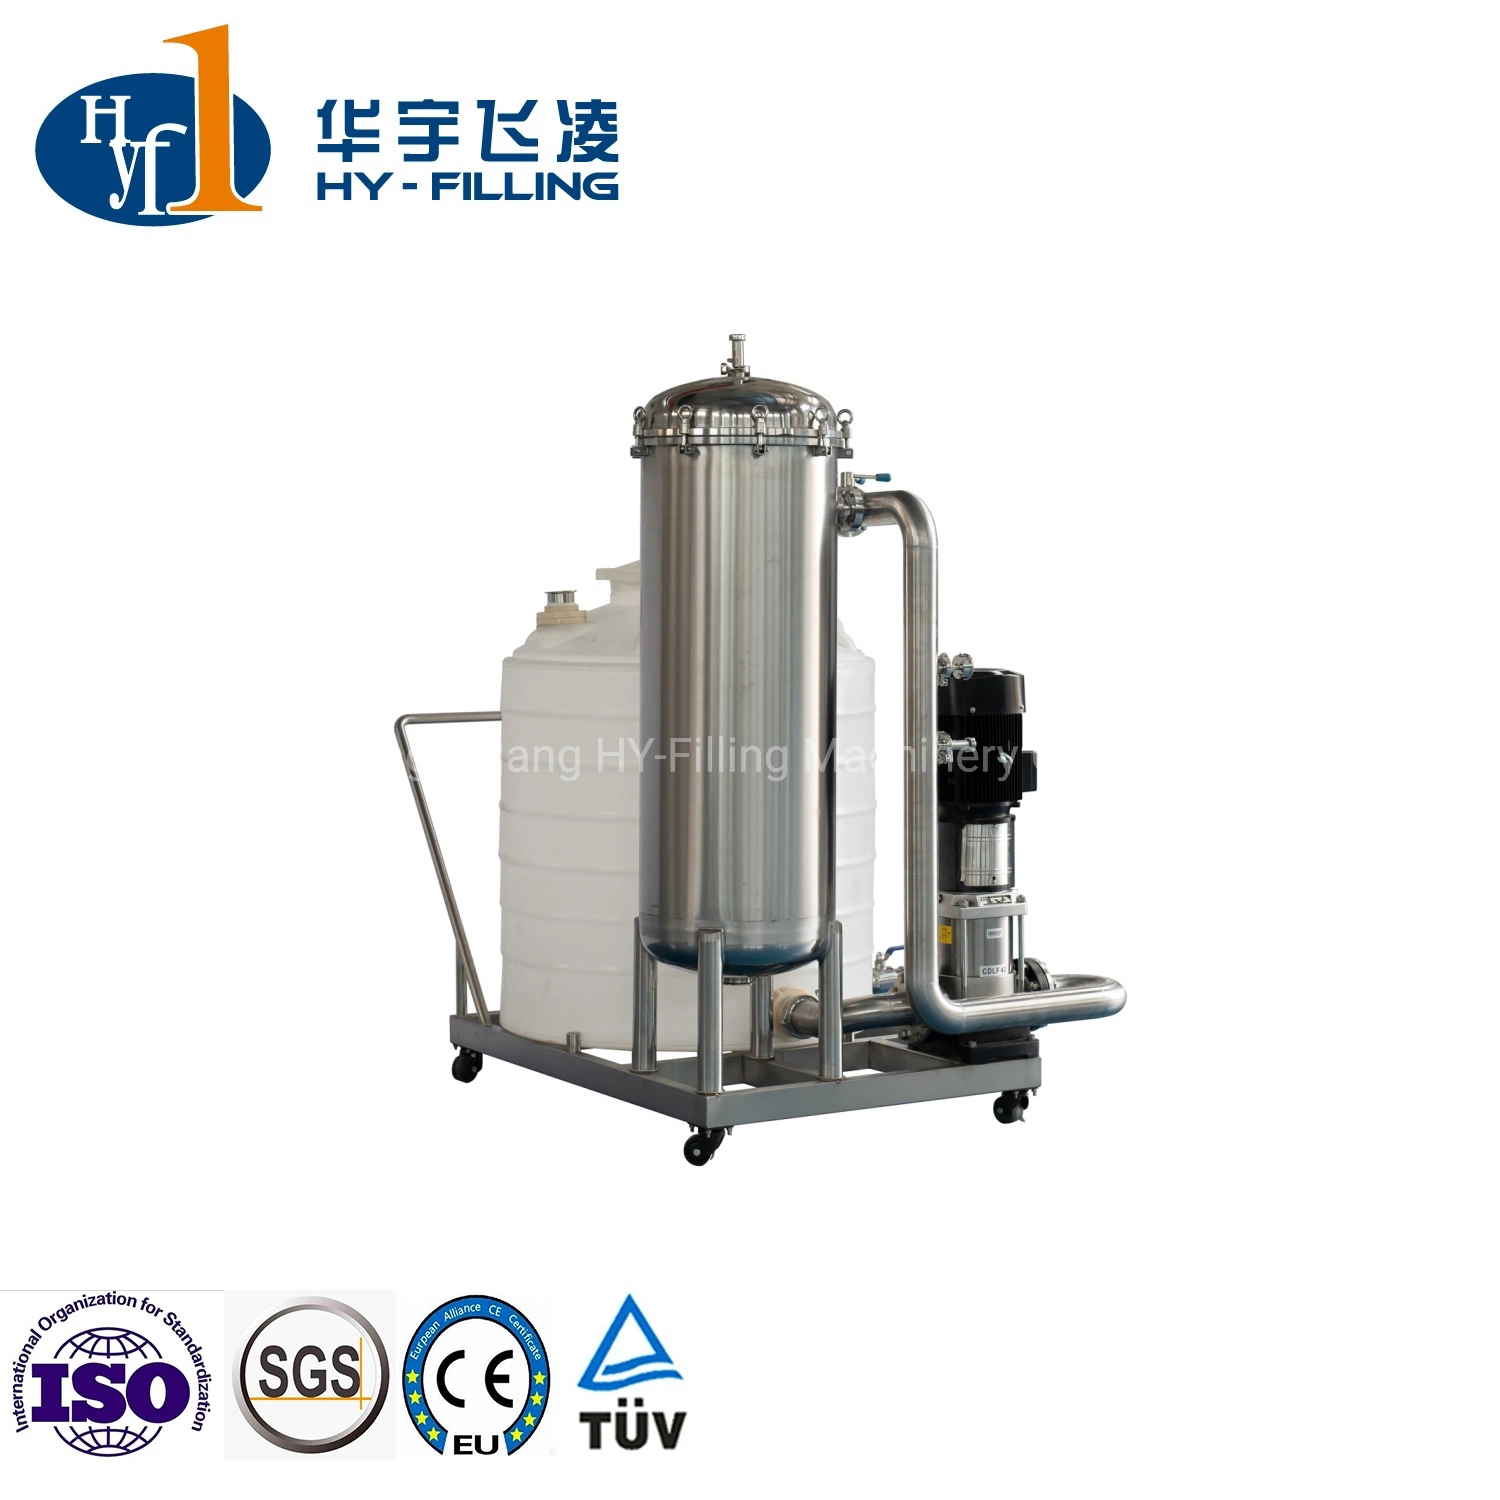 Hy-Filling 1000lph-50000lph Hoew Purifying Machine RO Filter Water Purification System for Beverage Filling Industry